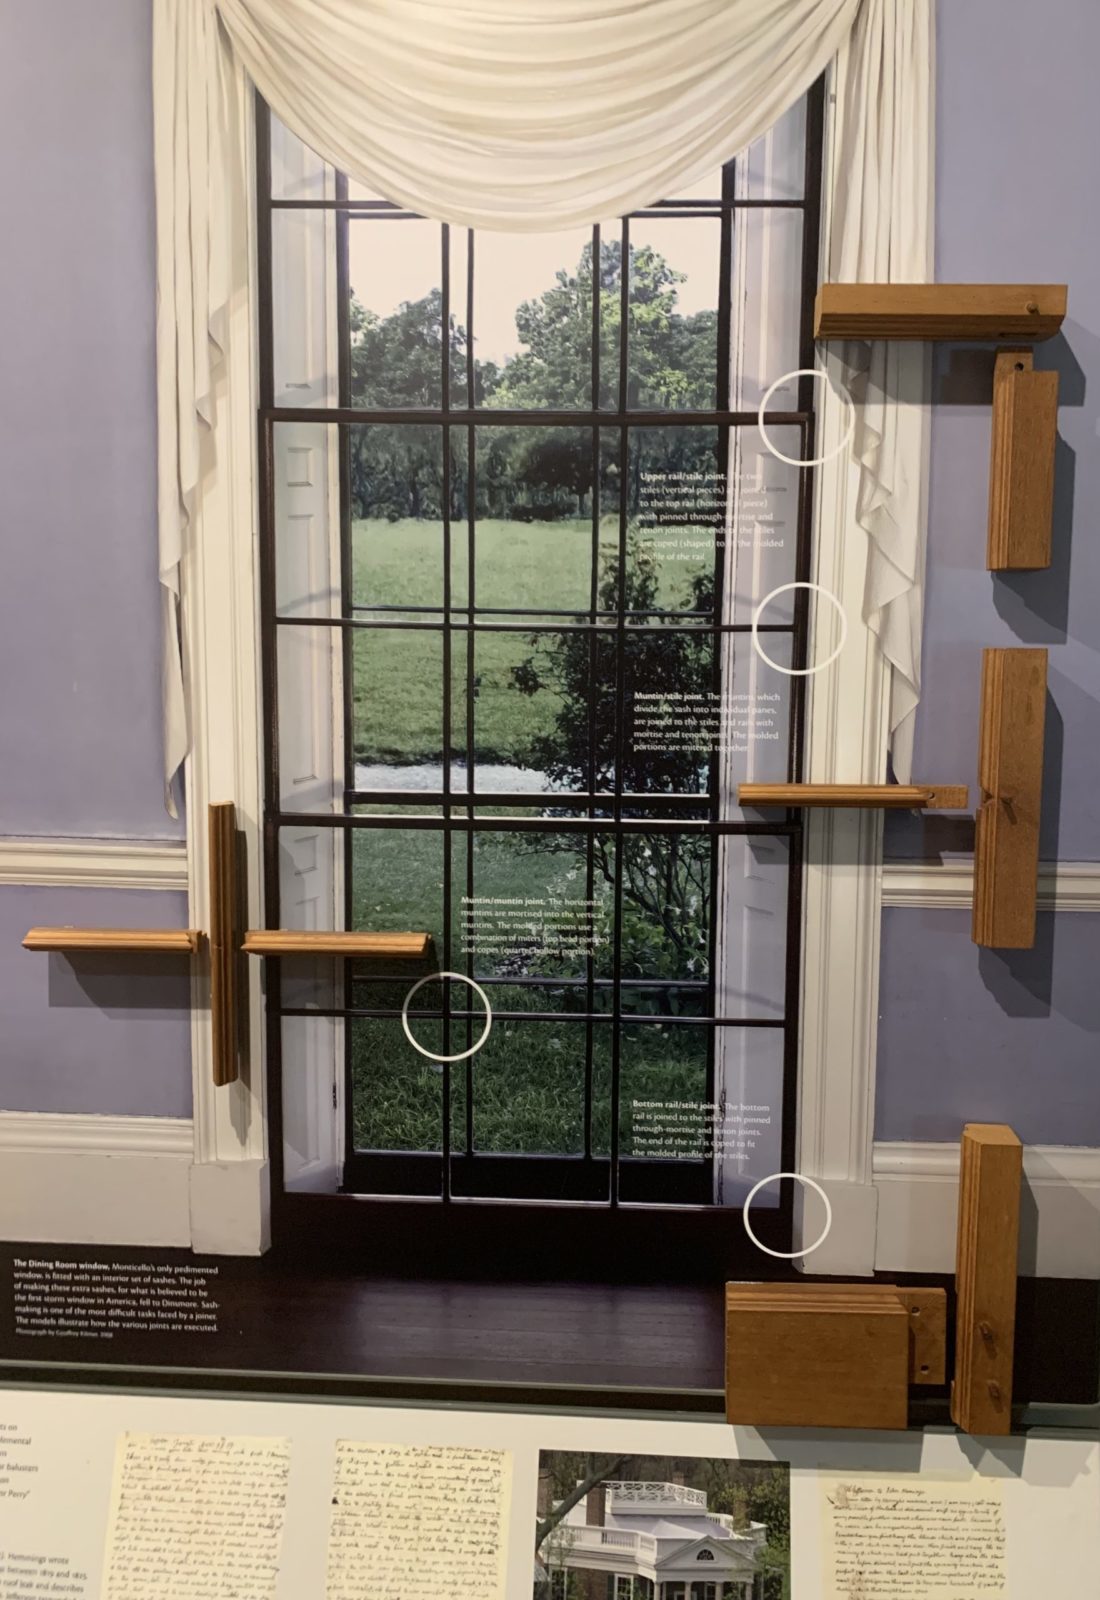 Example of mortise and tenon joinery on a window design